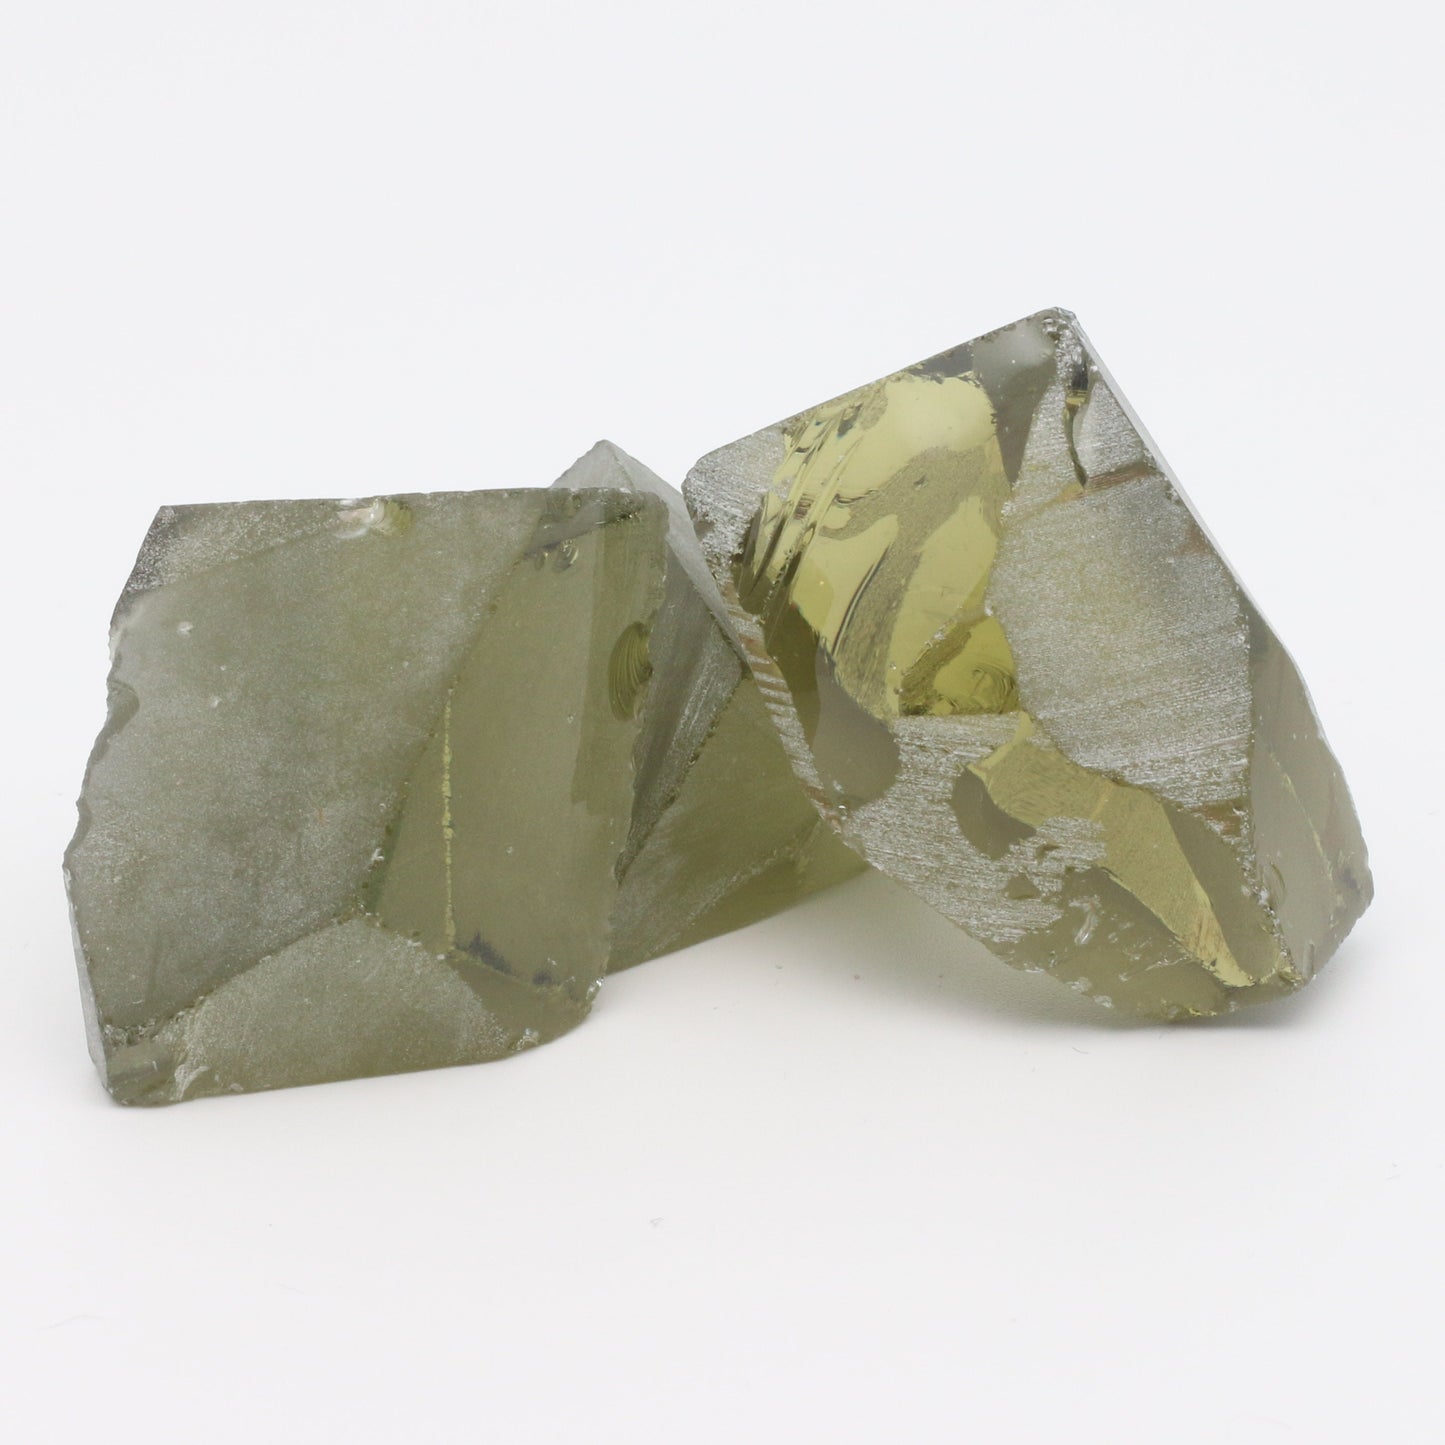 Peridot Nanosital Synthetic Lab Created Faceting Rough for Gem Cutting - #14 - Various Sizes